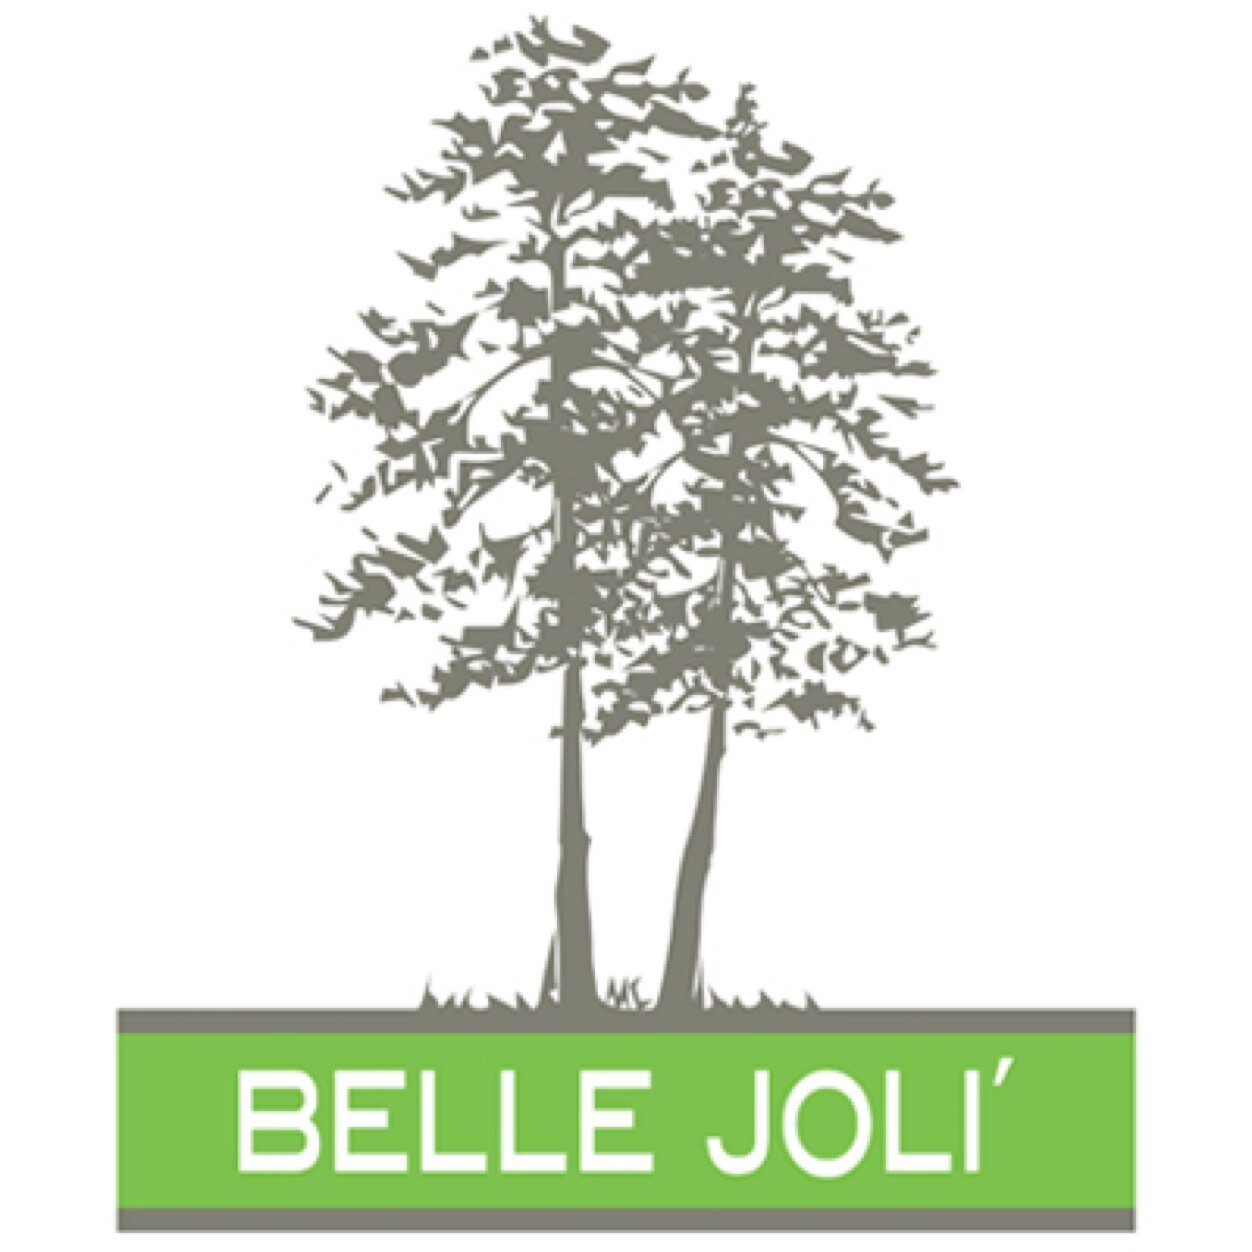 Belle Joli winery is offering highest quality multiple award-winning wines and sparkling wines. Tasting rooms are located in Sturgis and Deadwood.